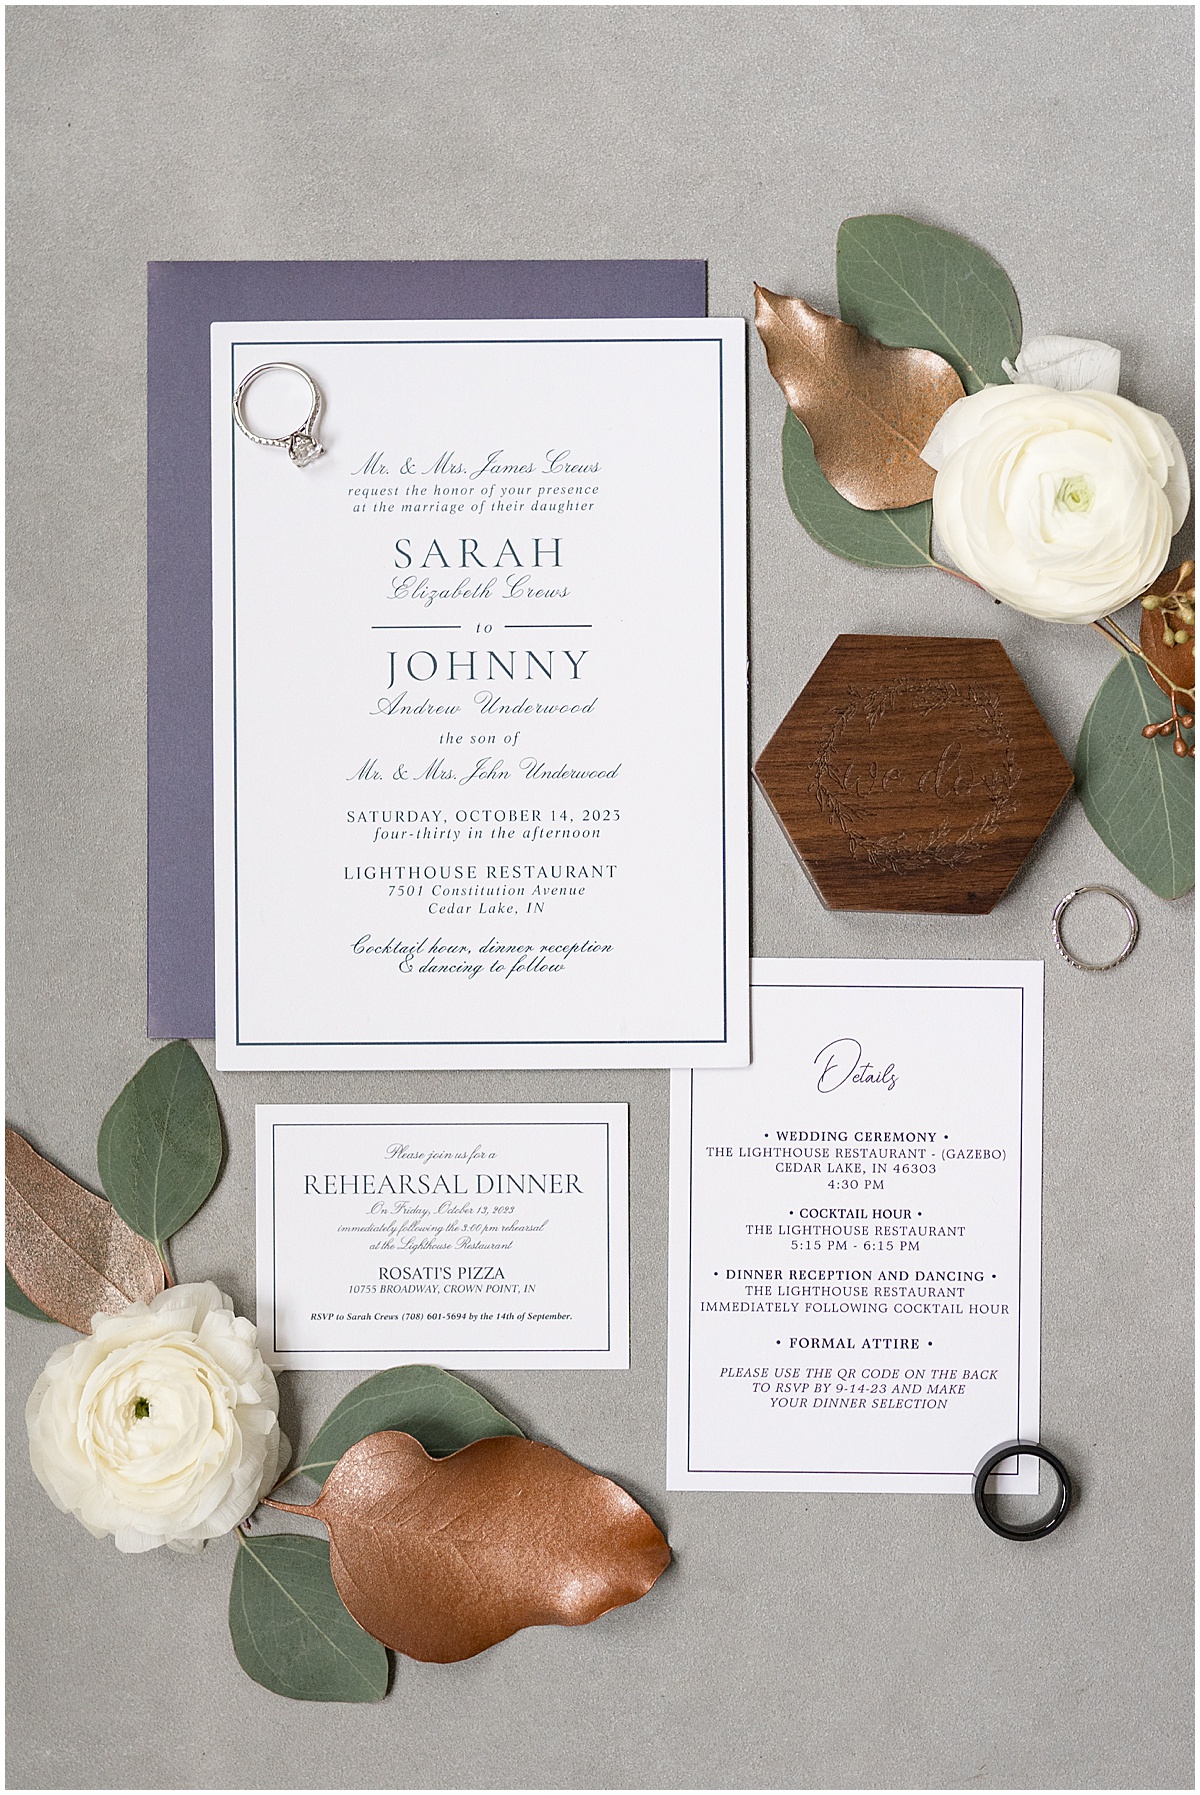 Invitation suite for Lighthouse Restaurant wedding in Cedar Lake, Indiana